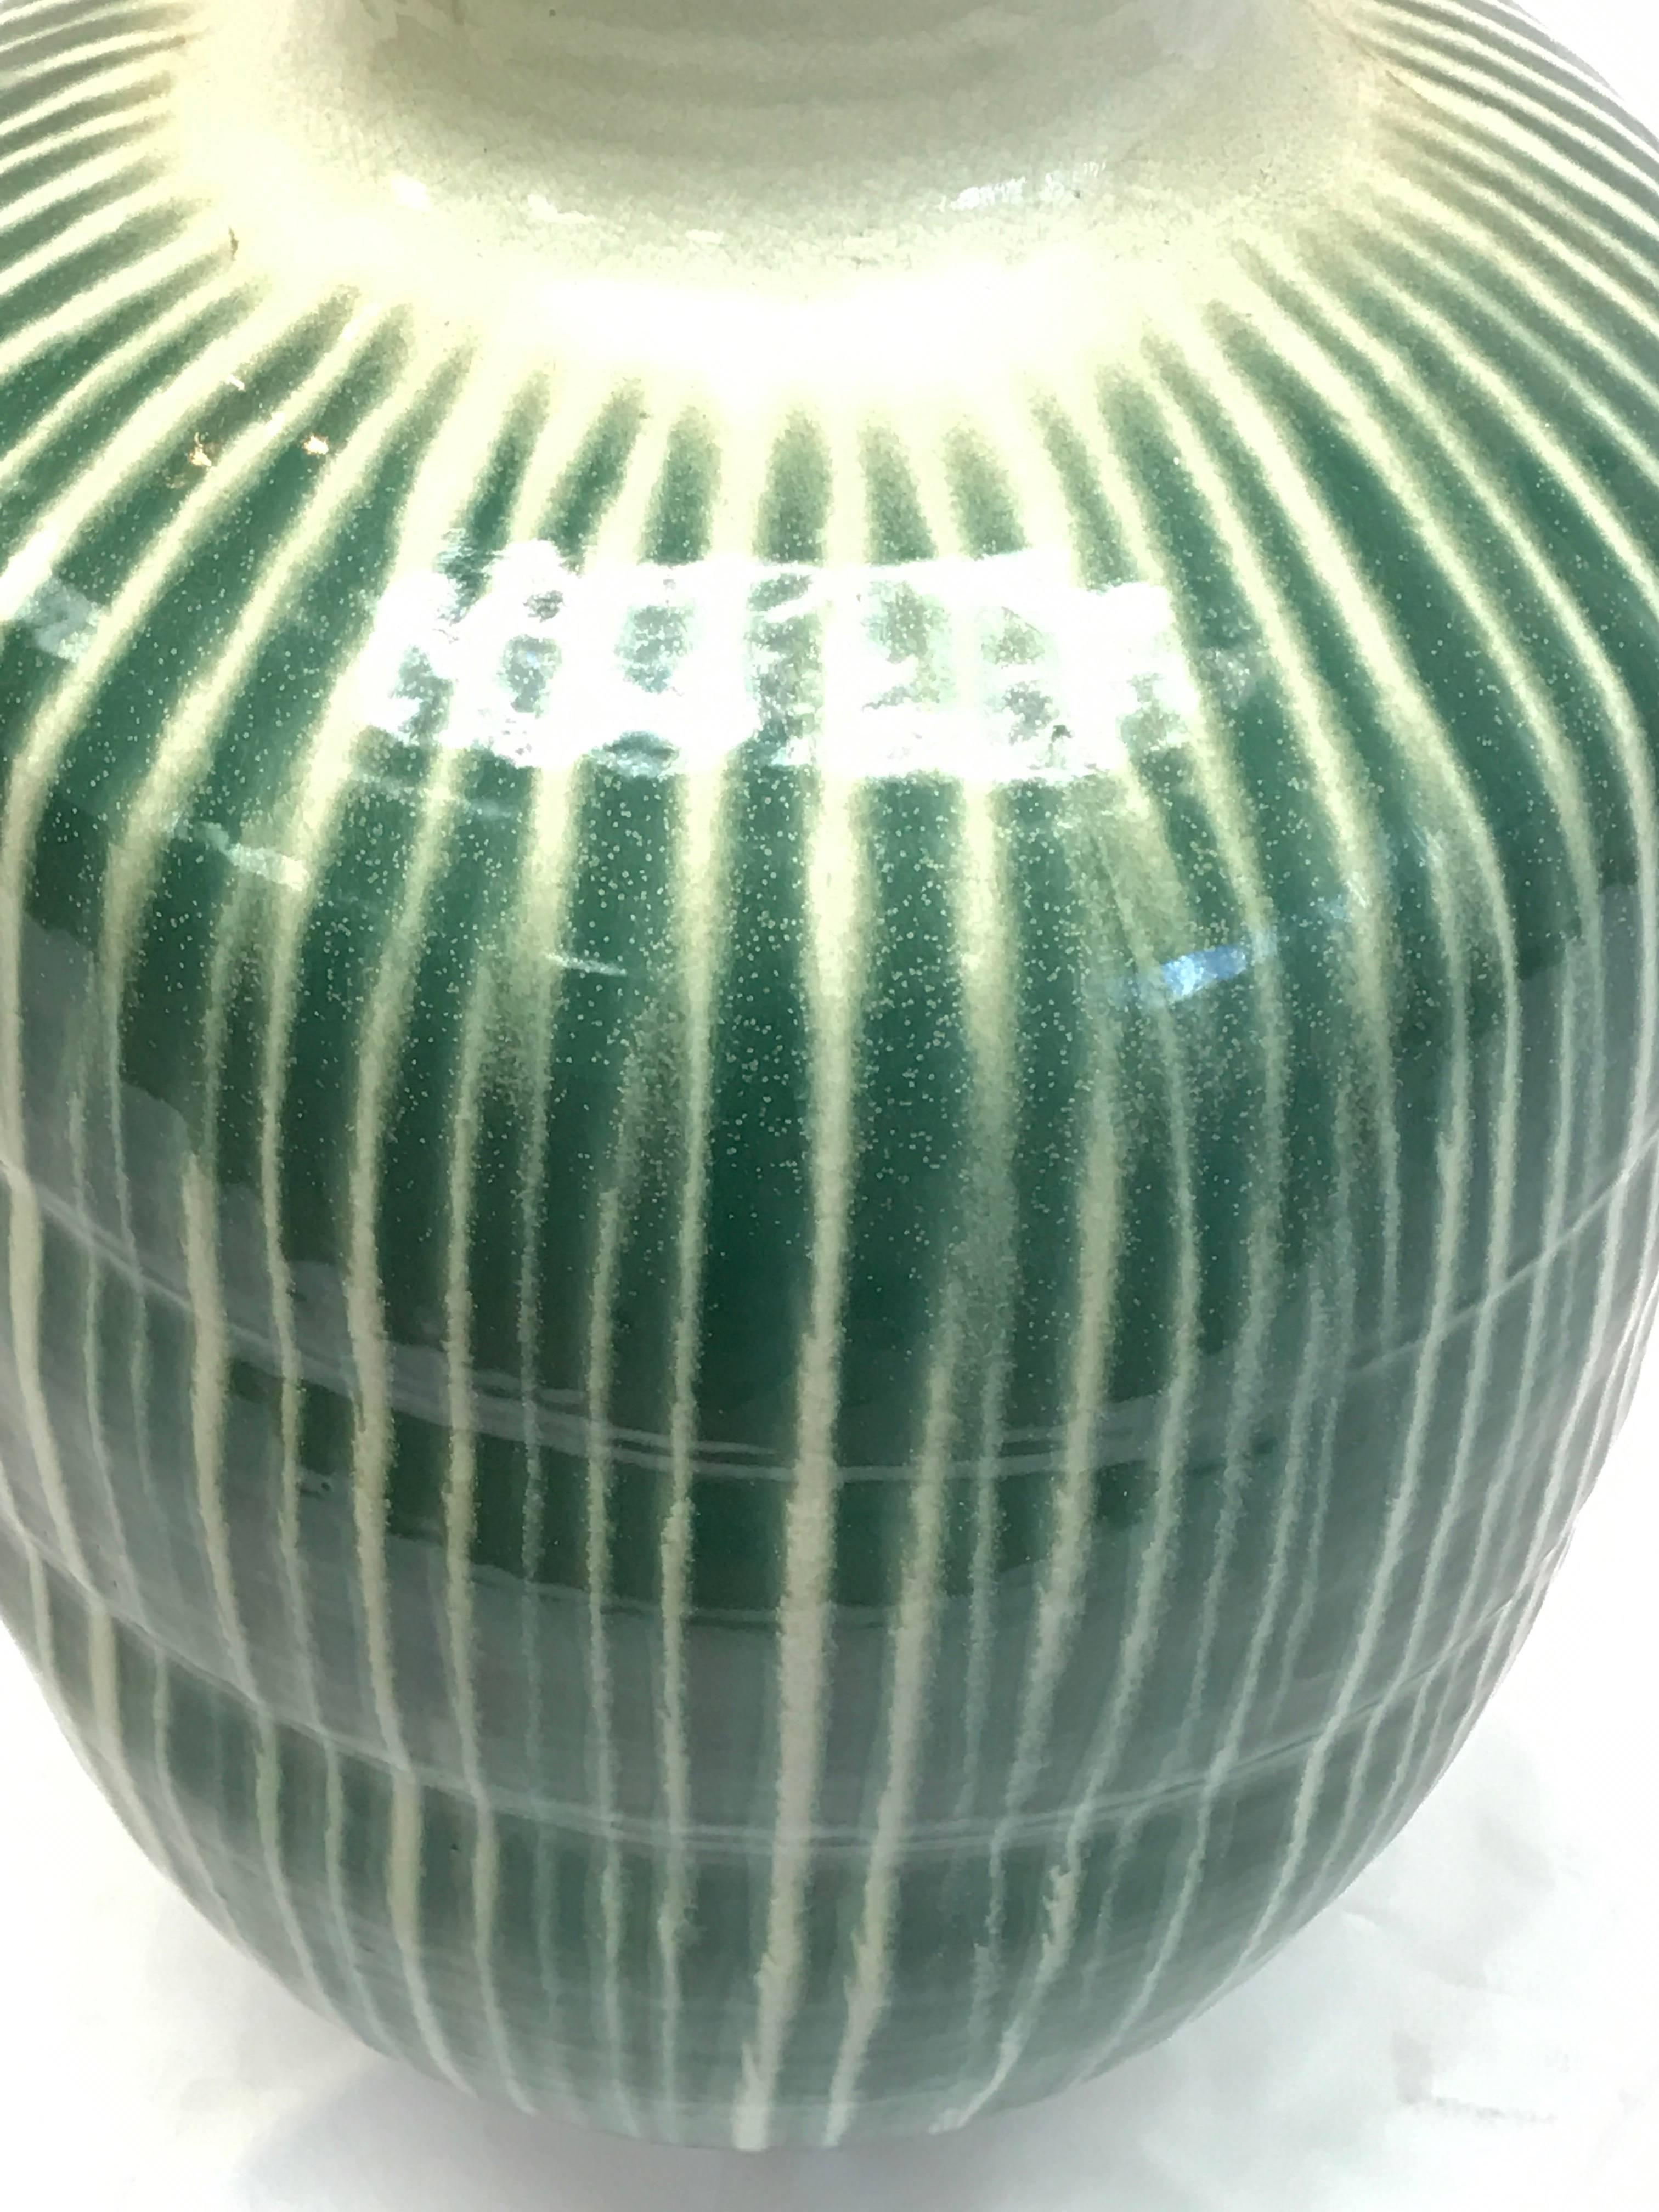 This Shigaraki kiln fired storage jar is striped in jade green which evokes the Japanese tradition of nature and balance. The unusual proportions of this very large vase demand attention as well as respect for heritage.